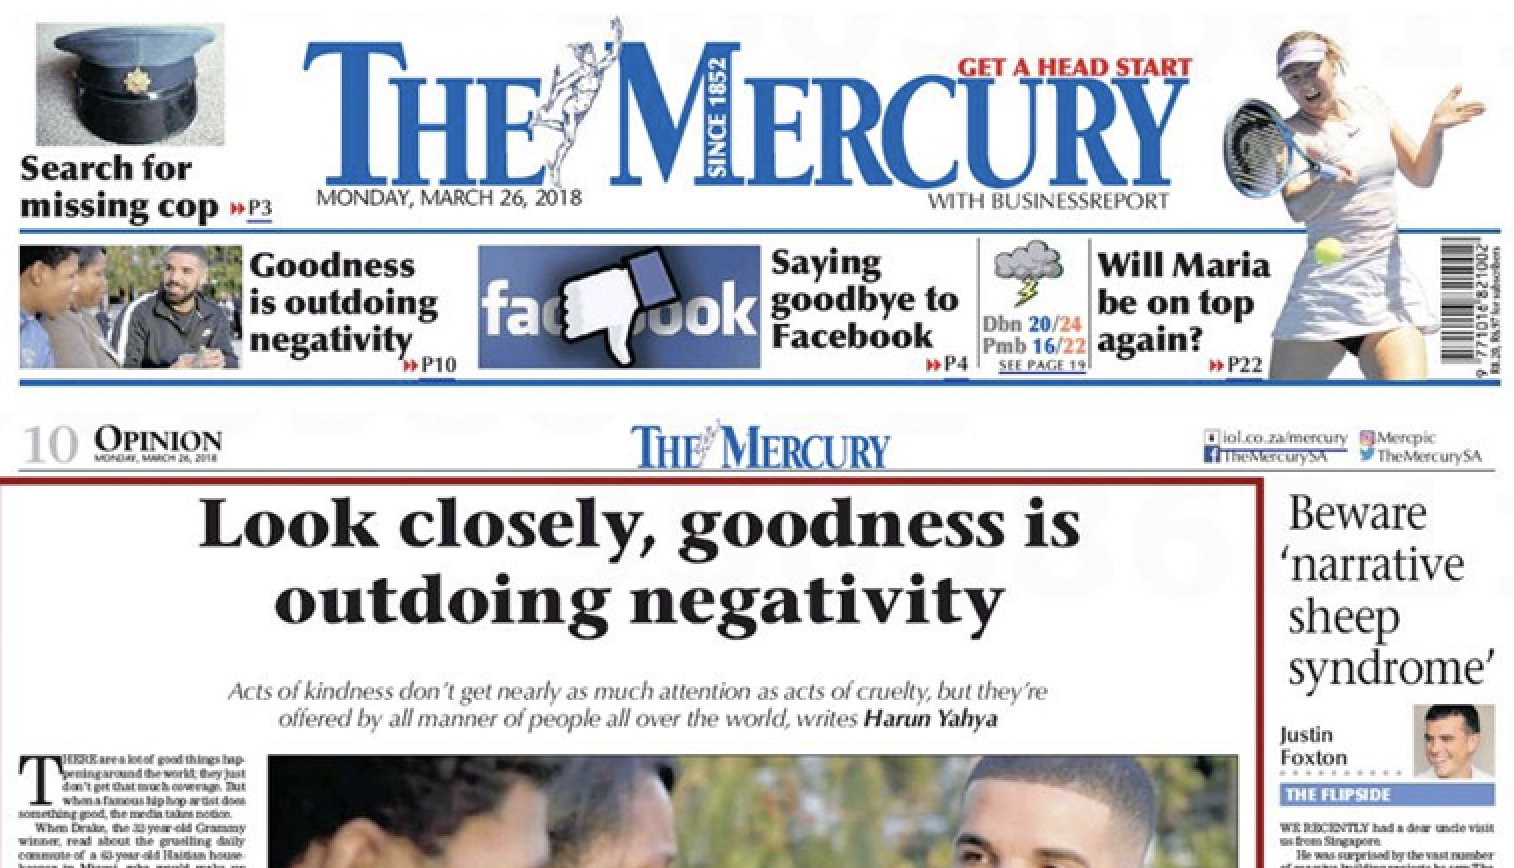 Look closely, goodness is outdoing negativity